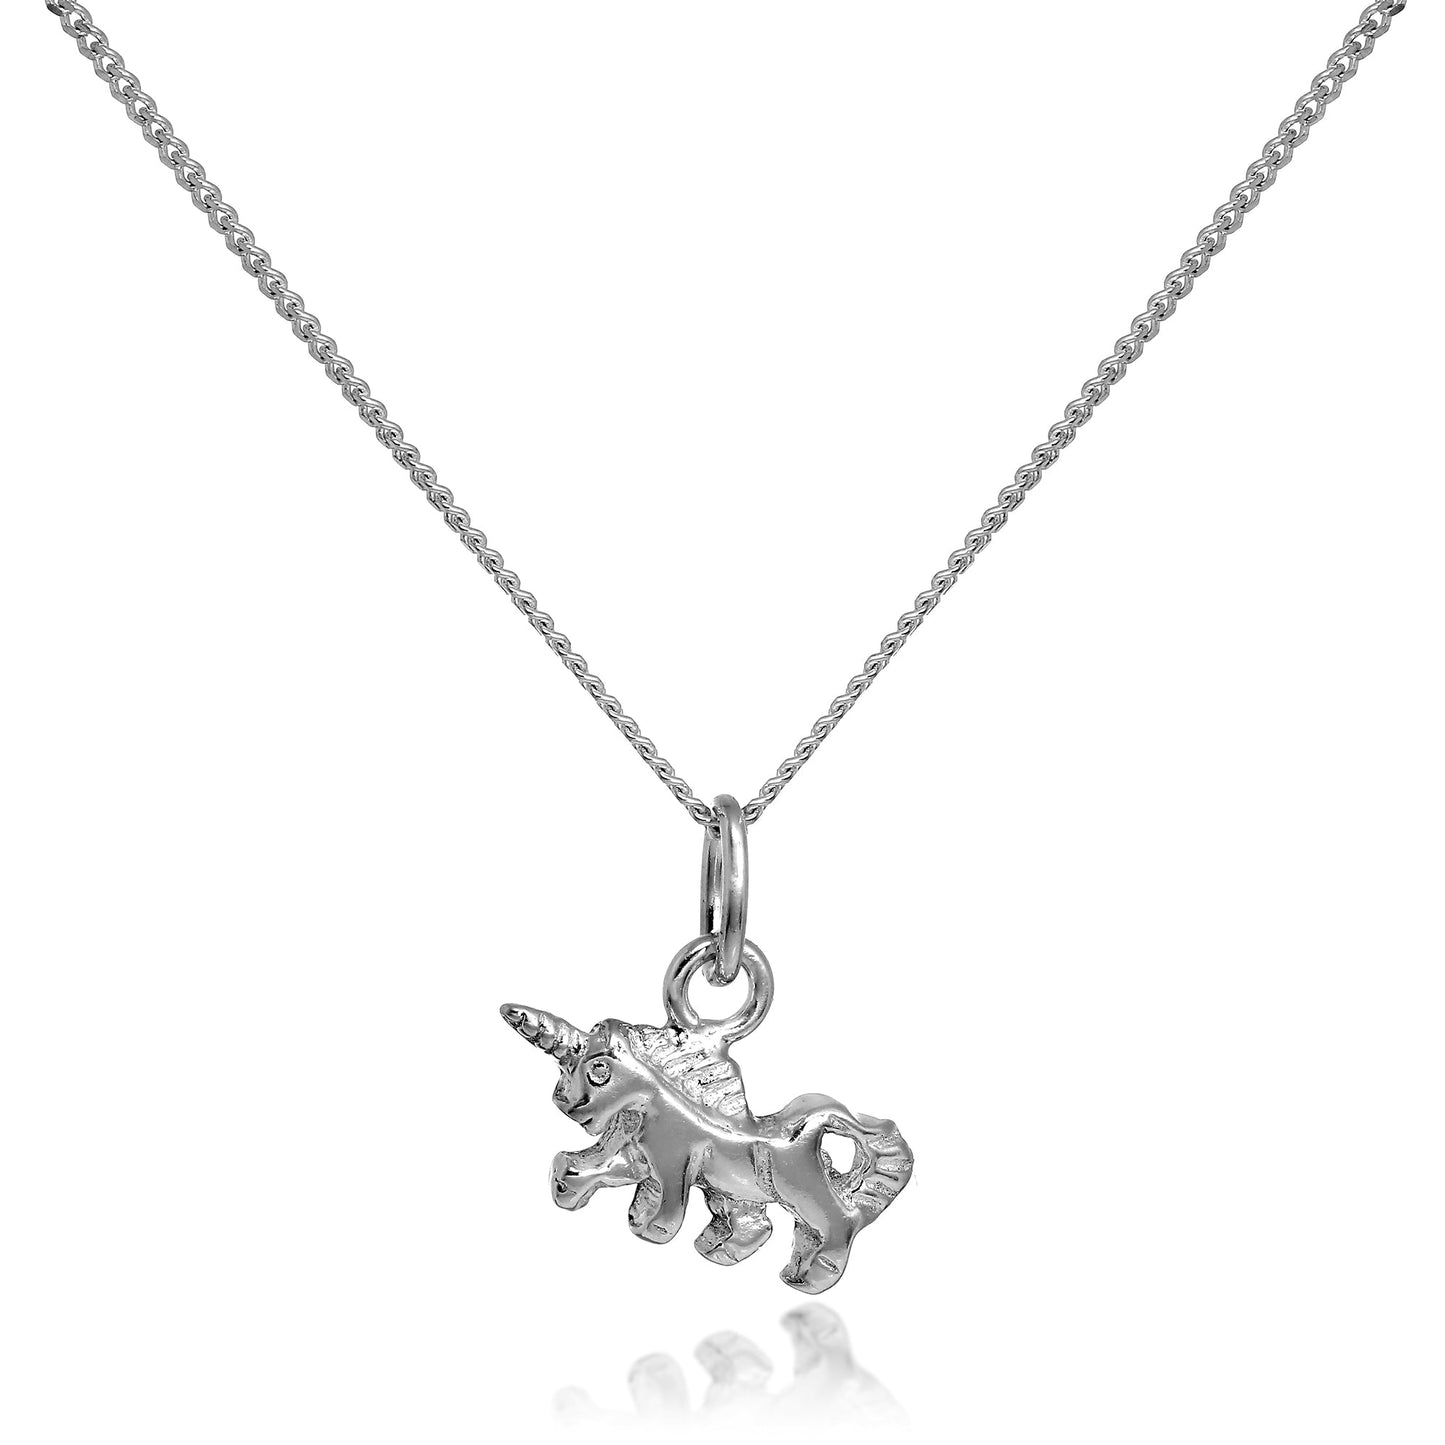 Tiny Sterling Silver Unicorn Pendant Necklace 16 - 22 Inches